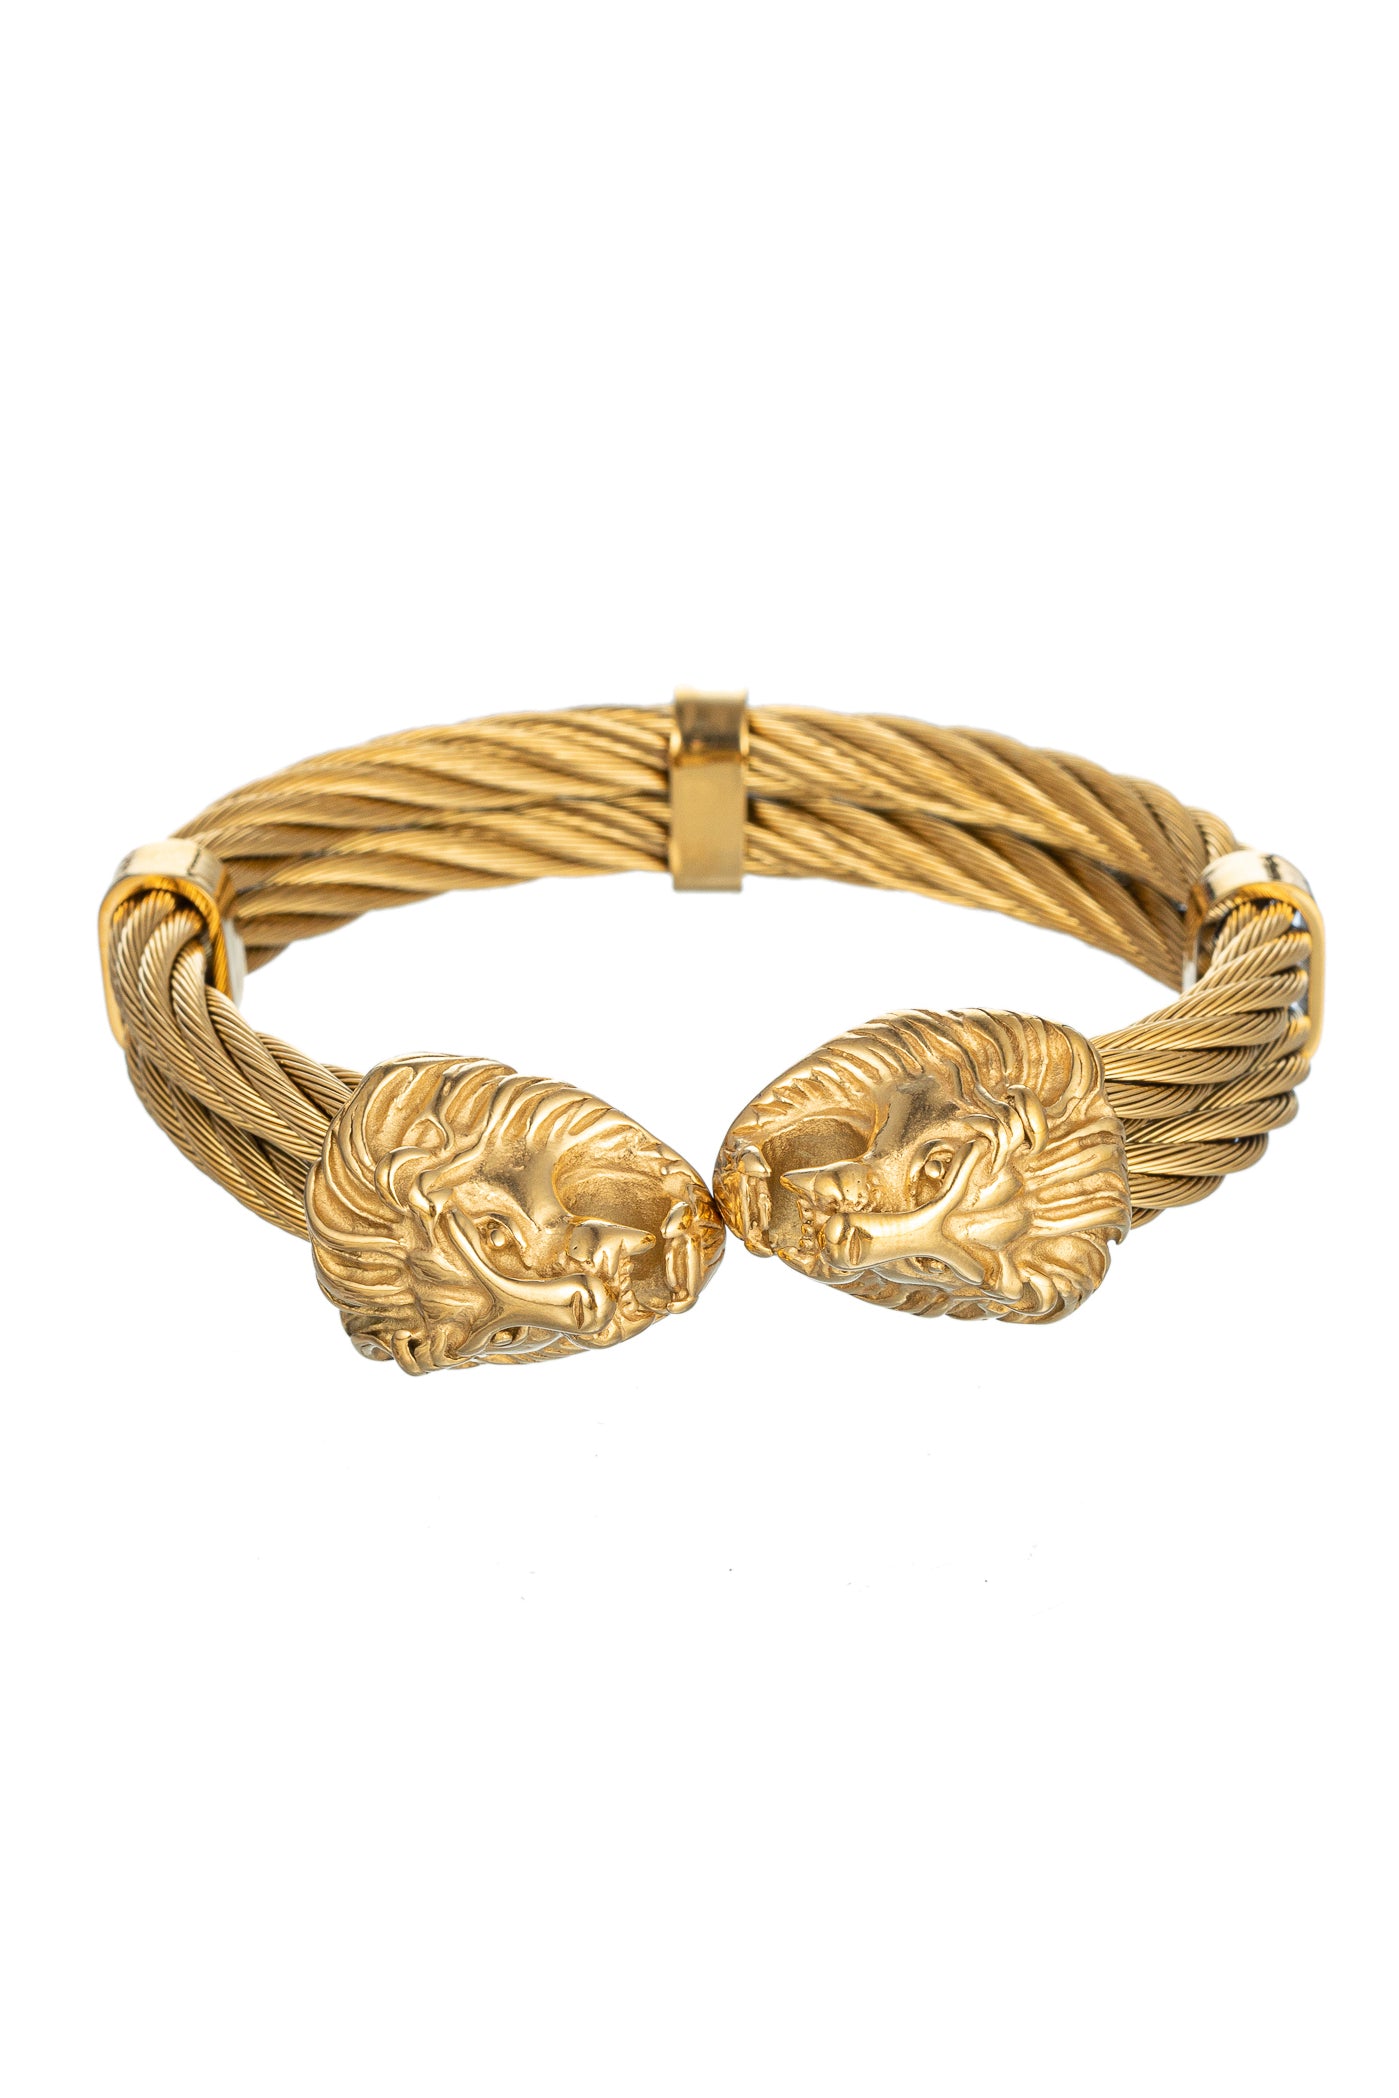 Gold Plated Alloy Lion Sher Brass Bracelet Jewelry Gift for Him, Boy, Men,  Father, Brother, Boyfriend